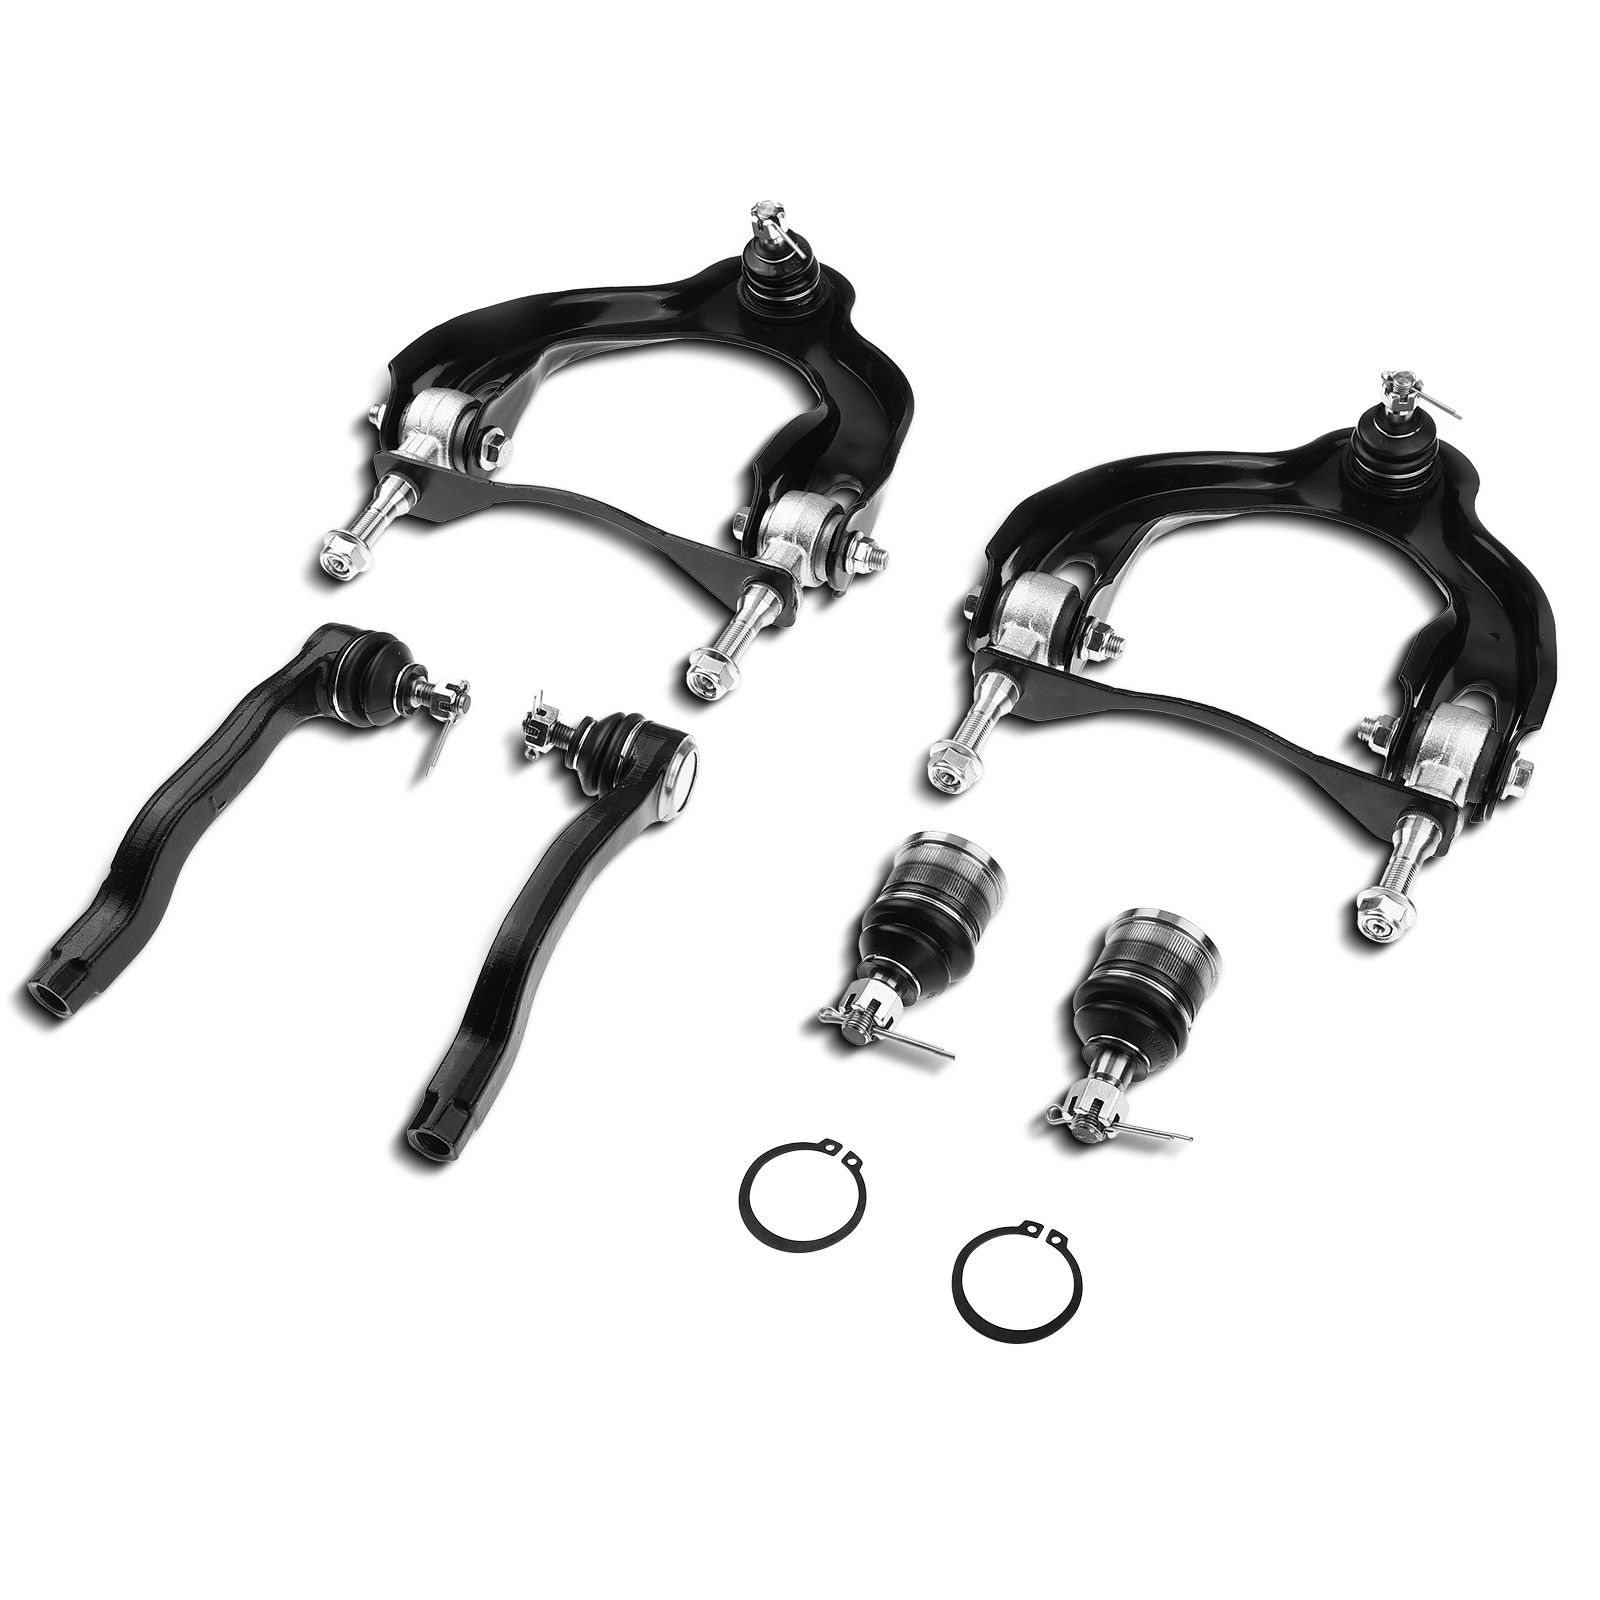 6 Pcs Front Upper Control Arm with Ball Joint Tie Rod End for Acura Honda Civic